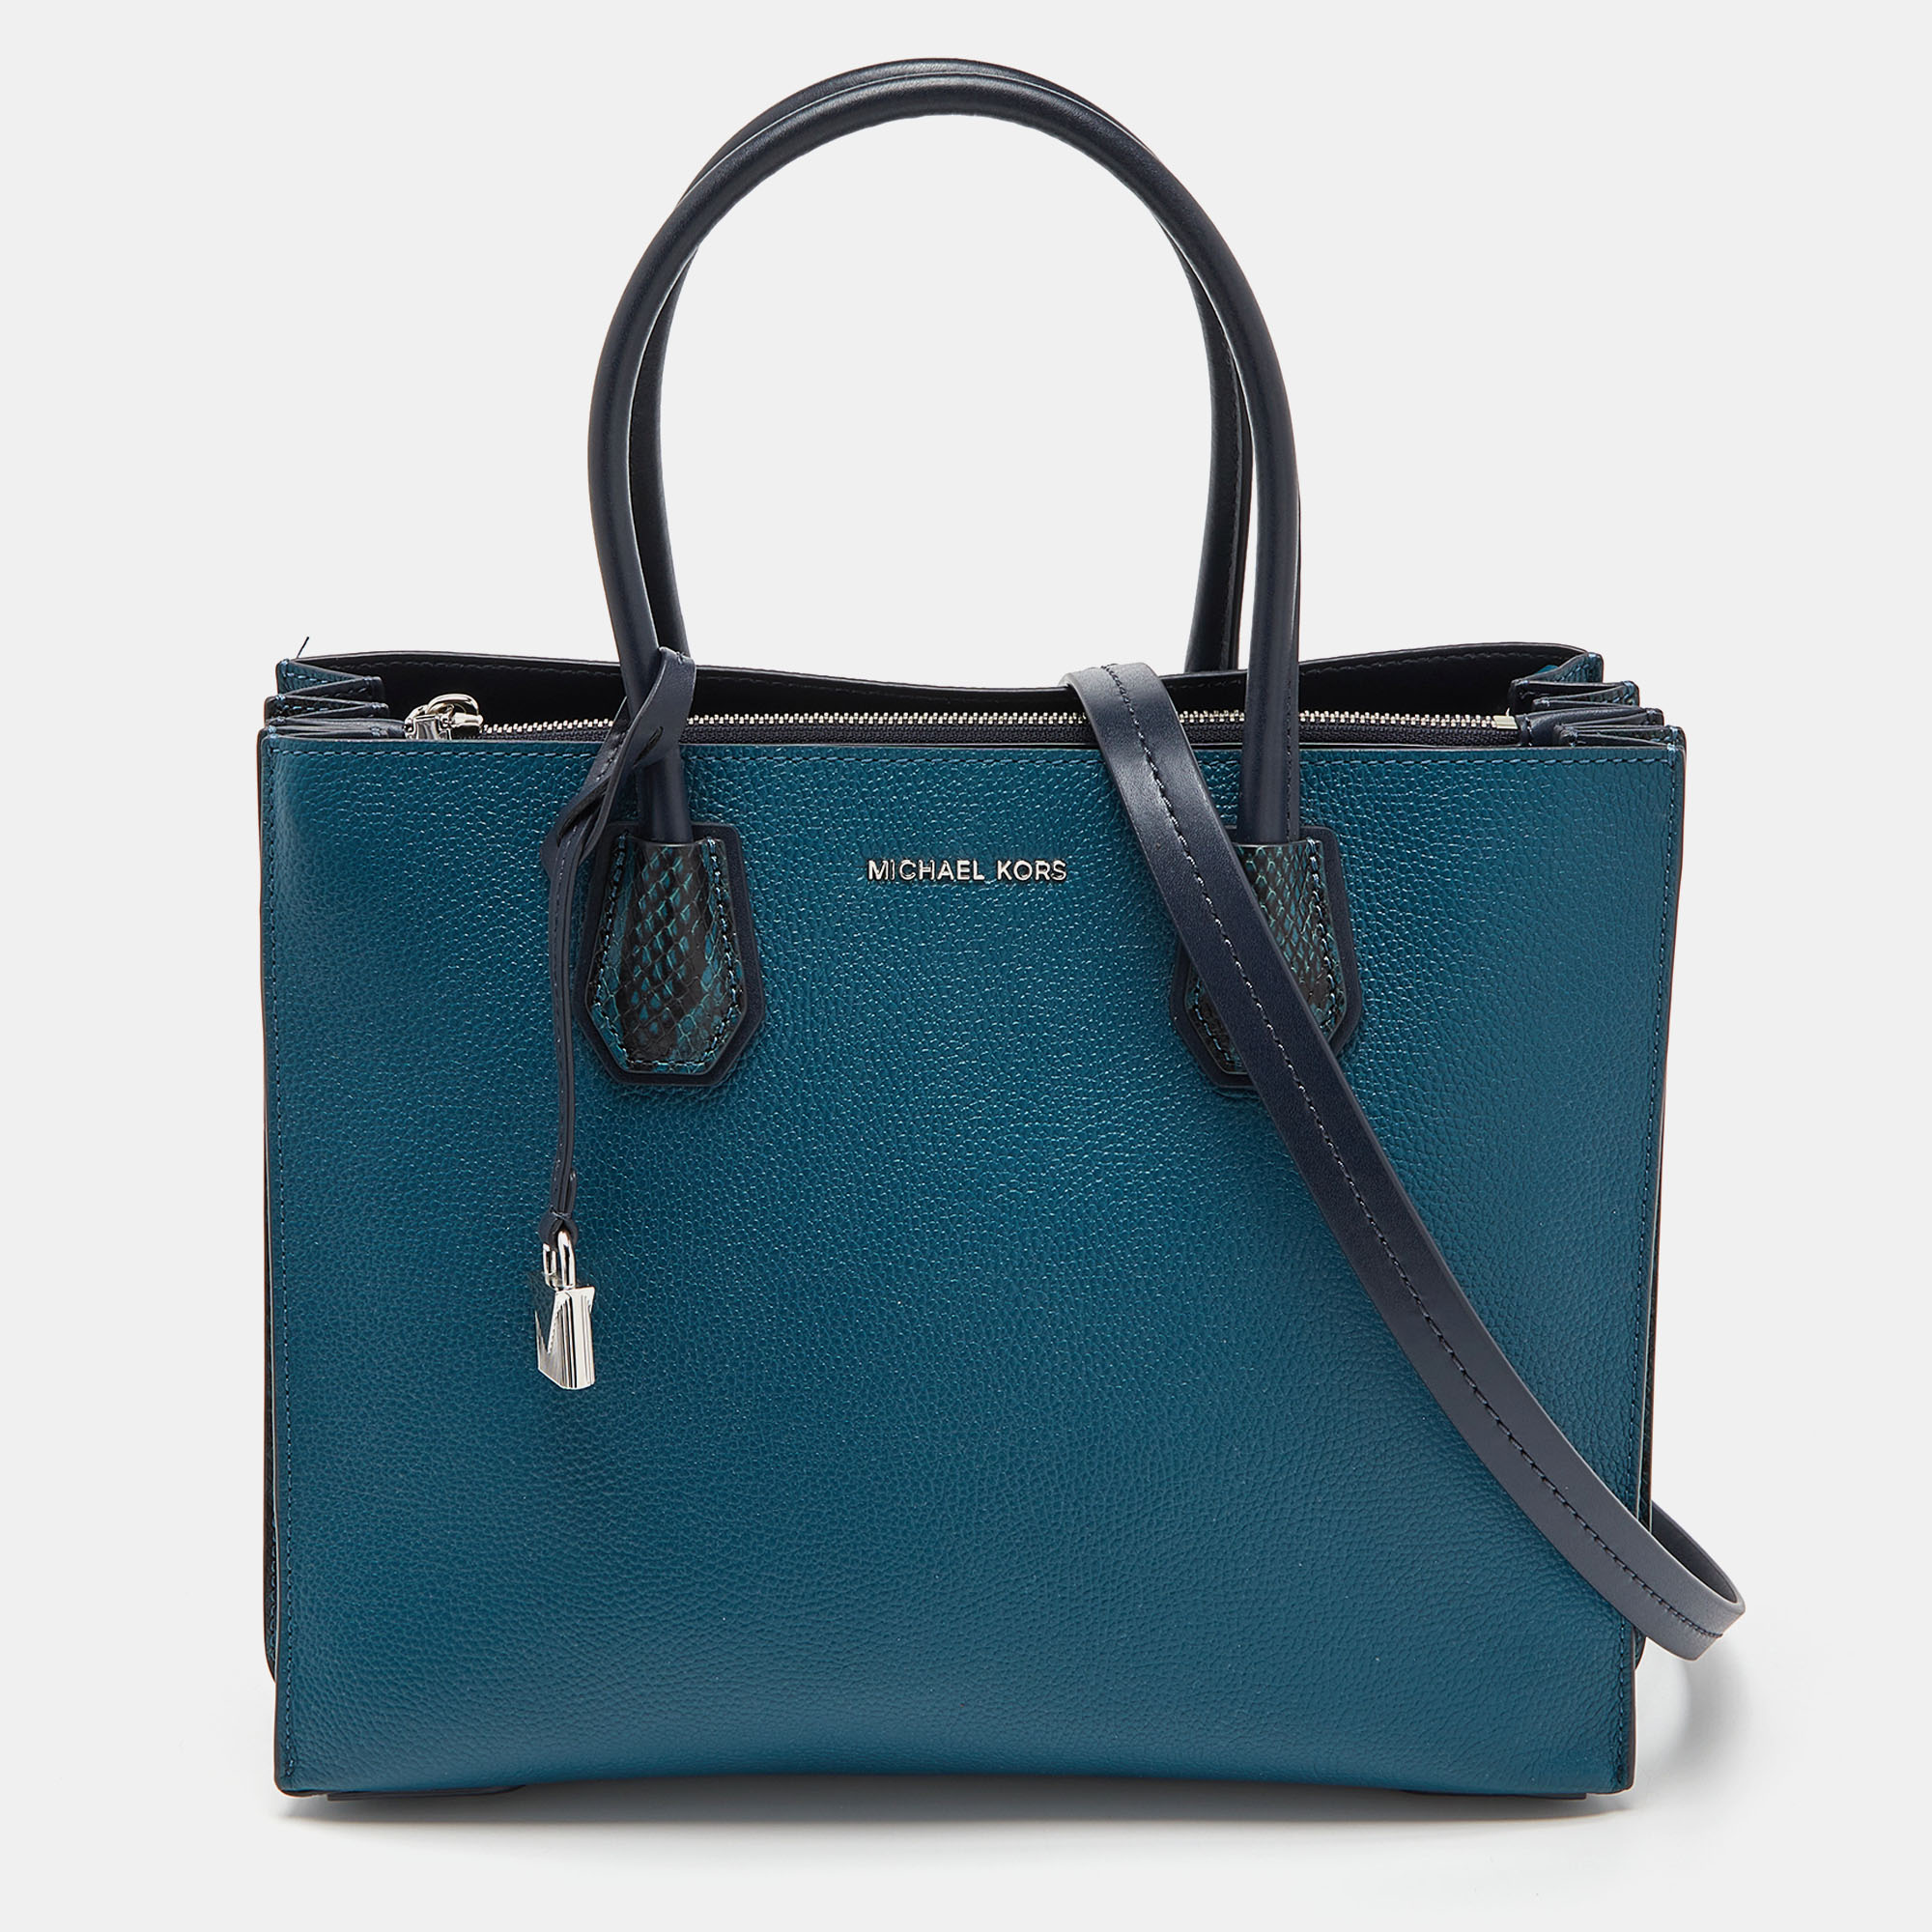 Swap that regular everyday tote with this charming Michael Kors bag. Sewn and assembled with care and love the bag promises to boost your style and hold your daily essentials with great ease.